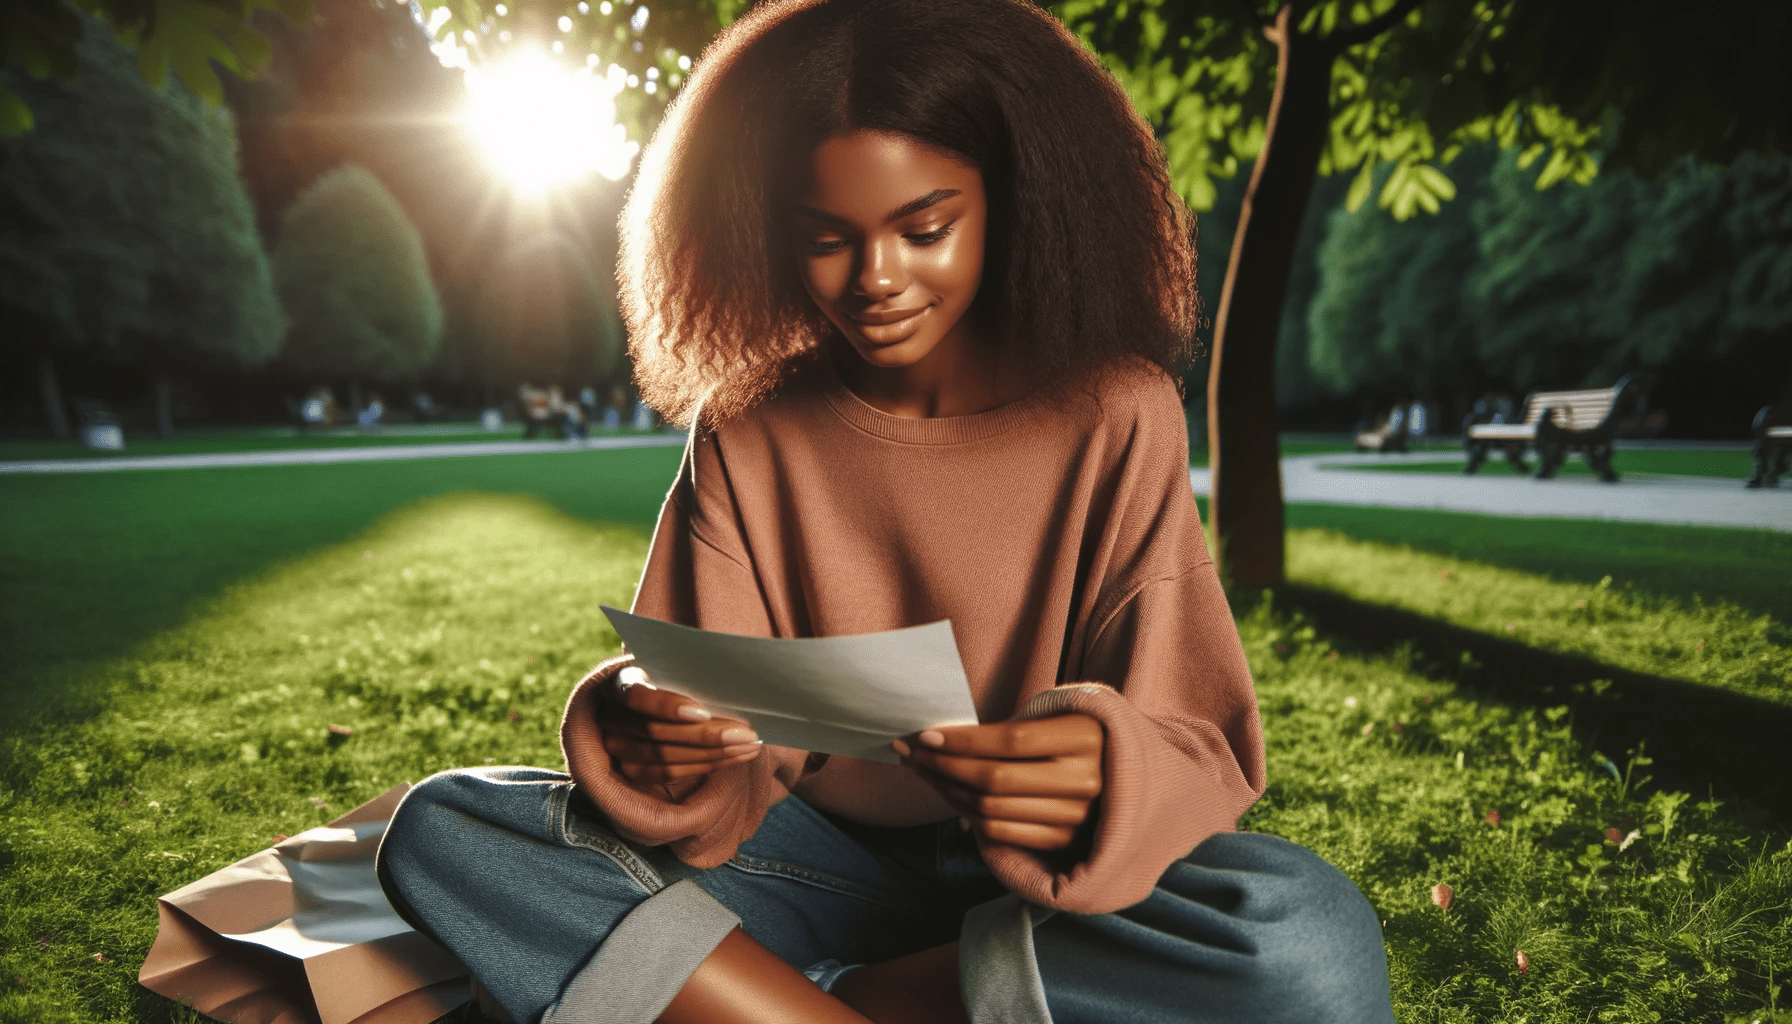 https://www.attractiondiary.com/wp-content/uploads/2023/02/Photo-in-a-sunlit-park-with-trees-in-the-background.-A-girl-of-African-descent-sits-on-the-grass-engrossed-in-reading-a-love-letter.-She-clutches-the.png